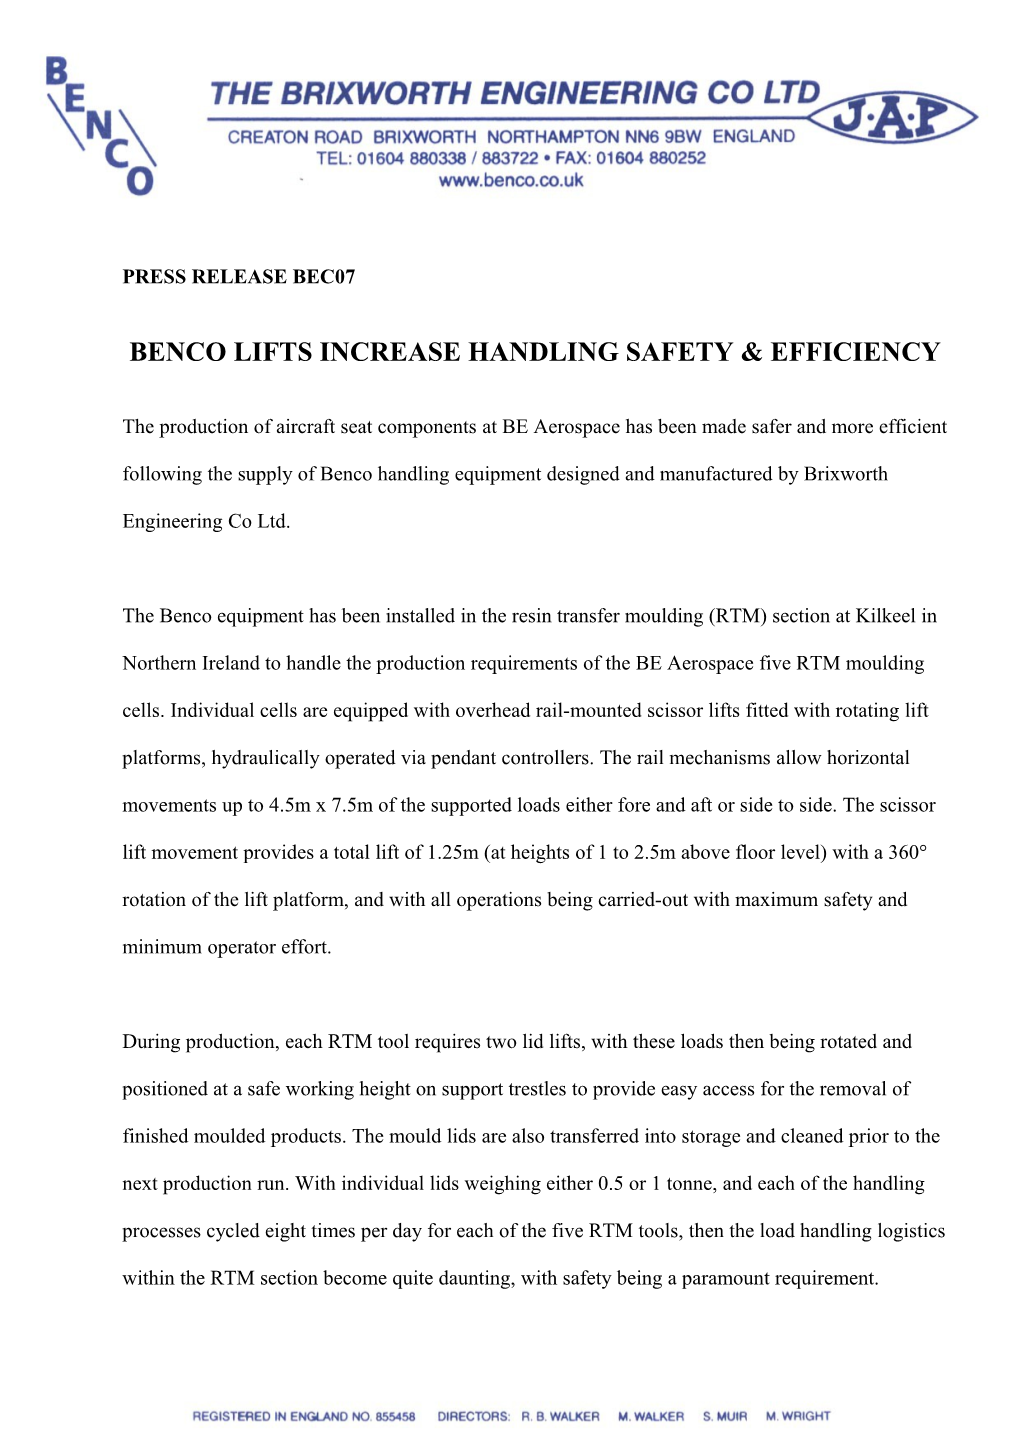 Press Release Bec07 -The Brixworth Engineering Co Ltd (Page 1 of 3)